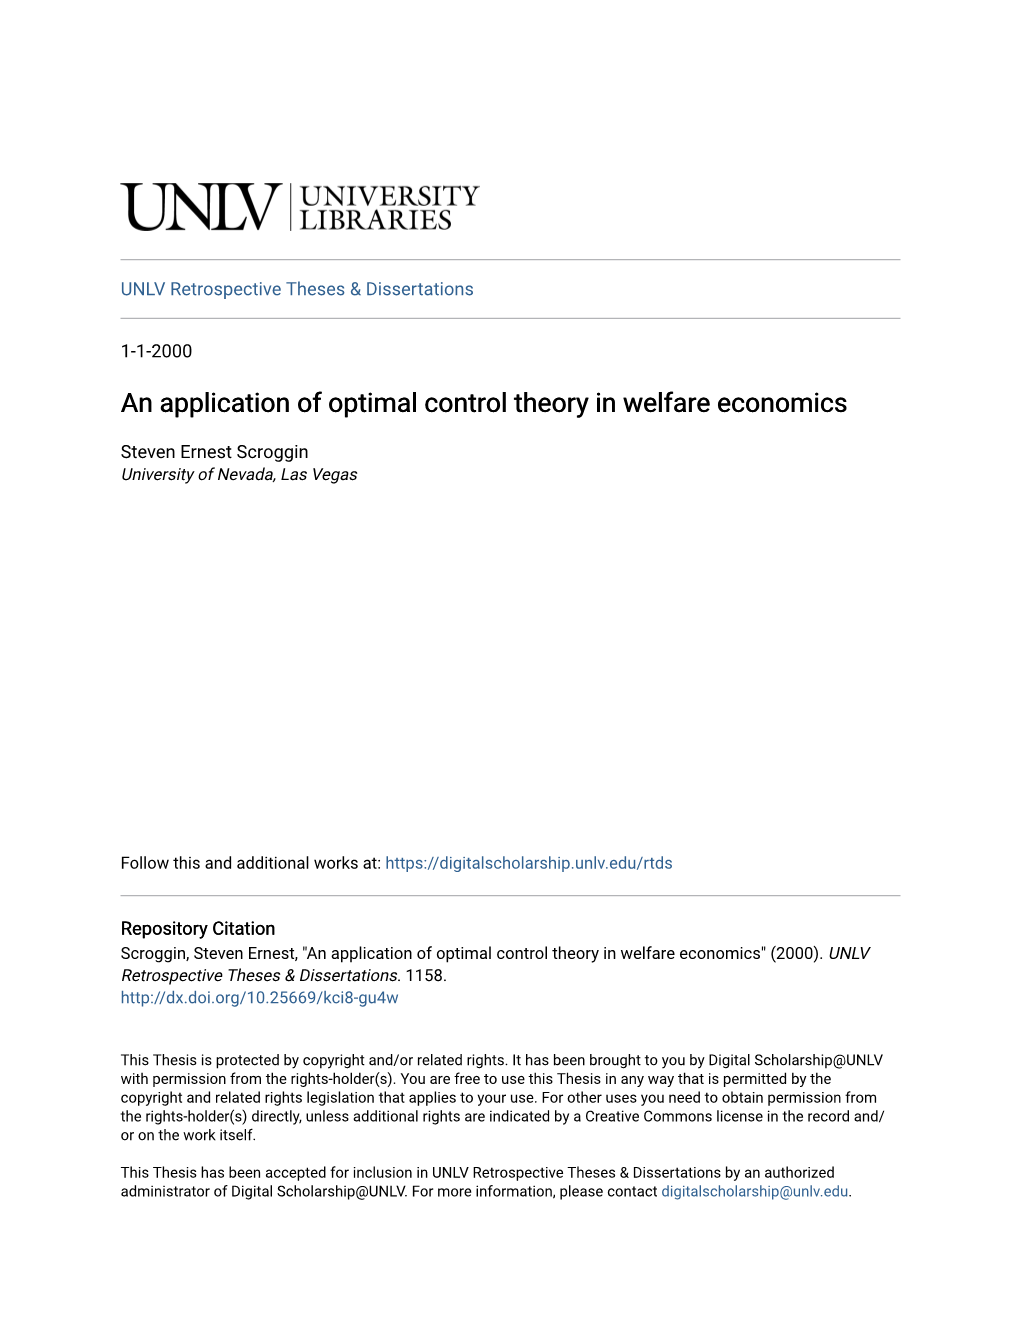 An Application of Optimal Control Theory in Welfare Economics